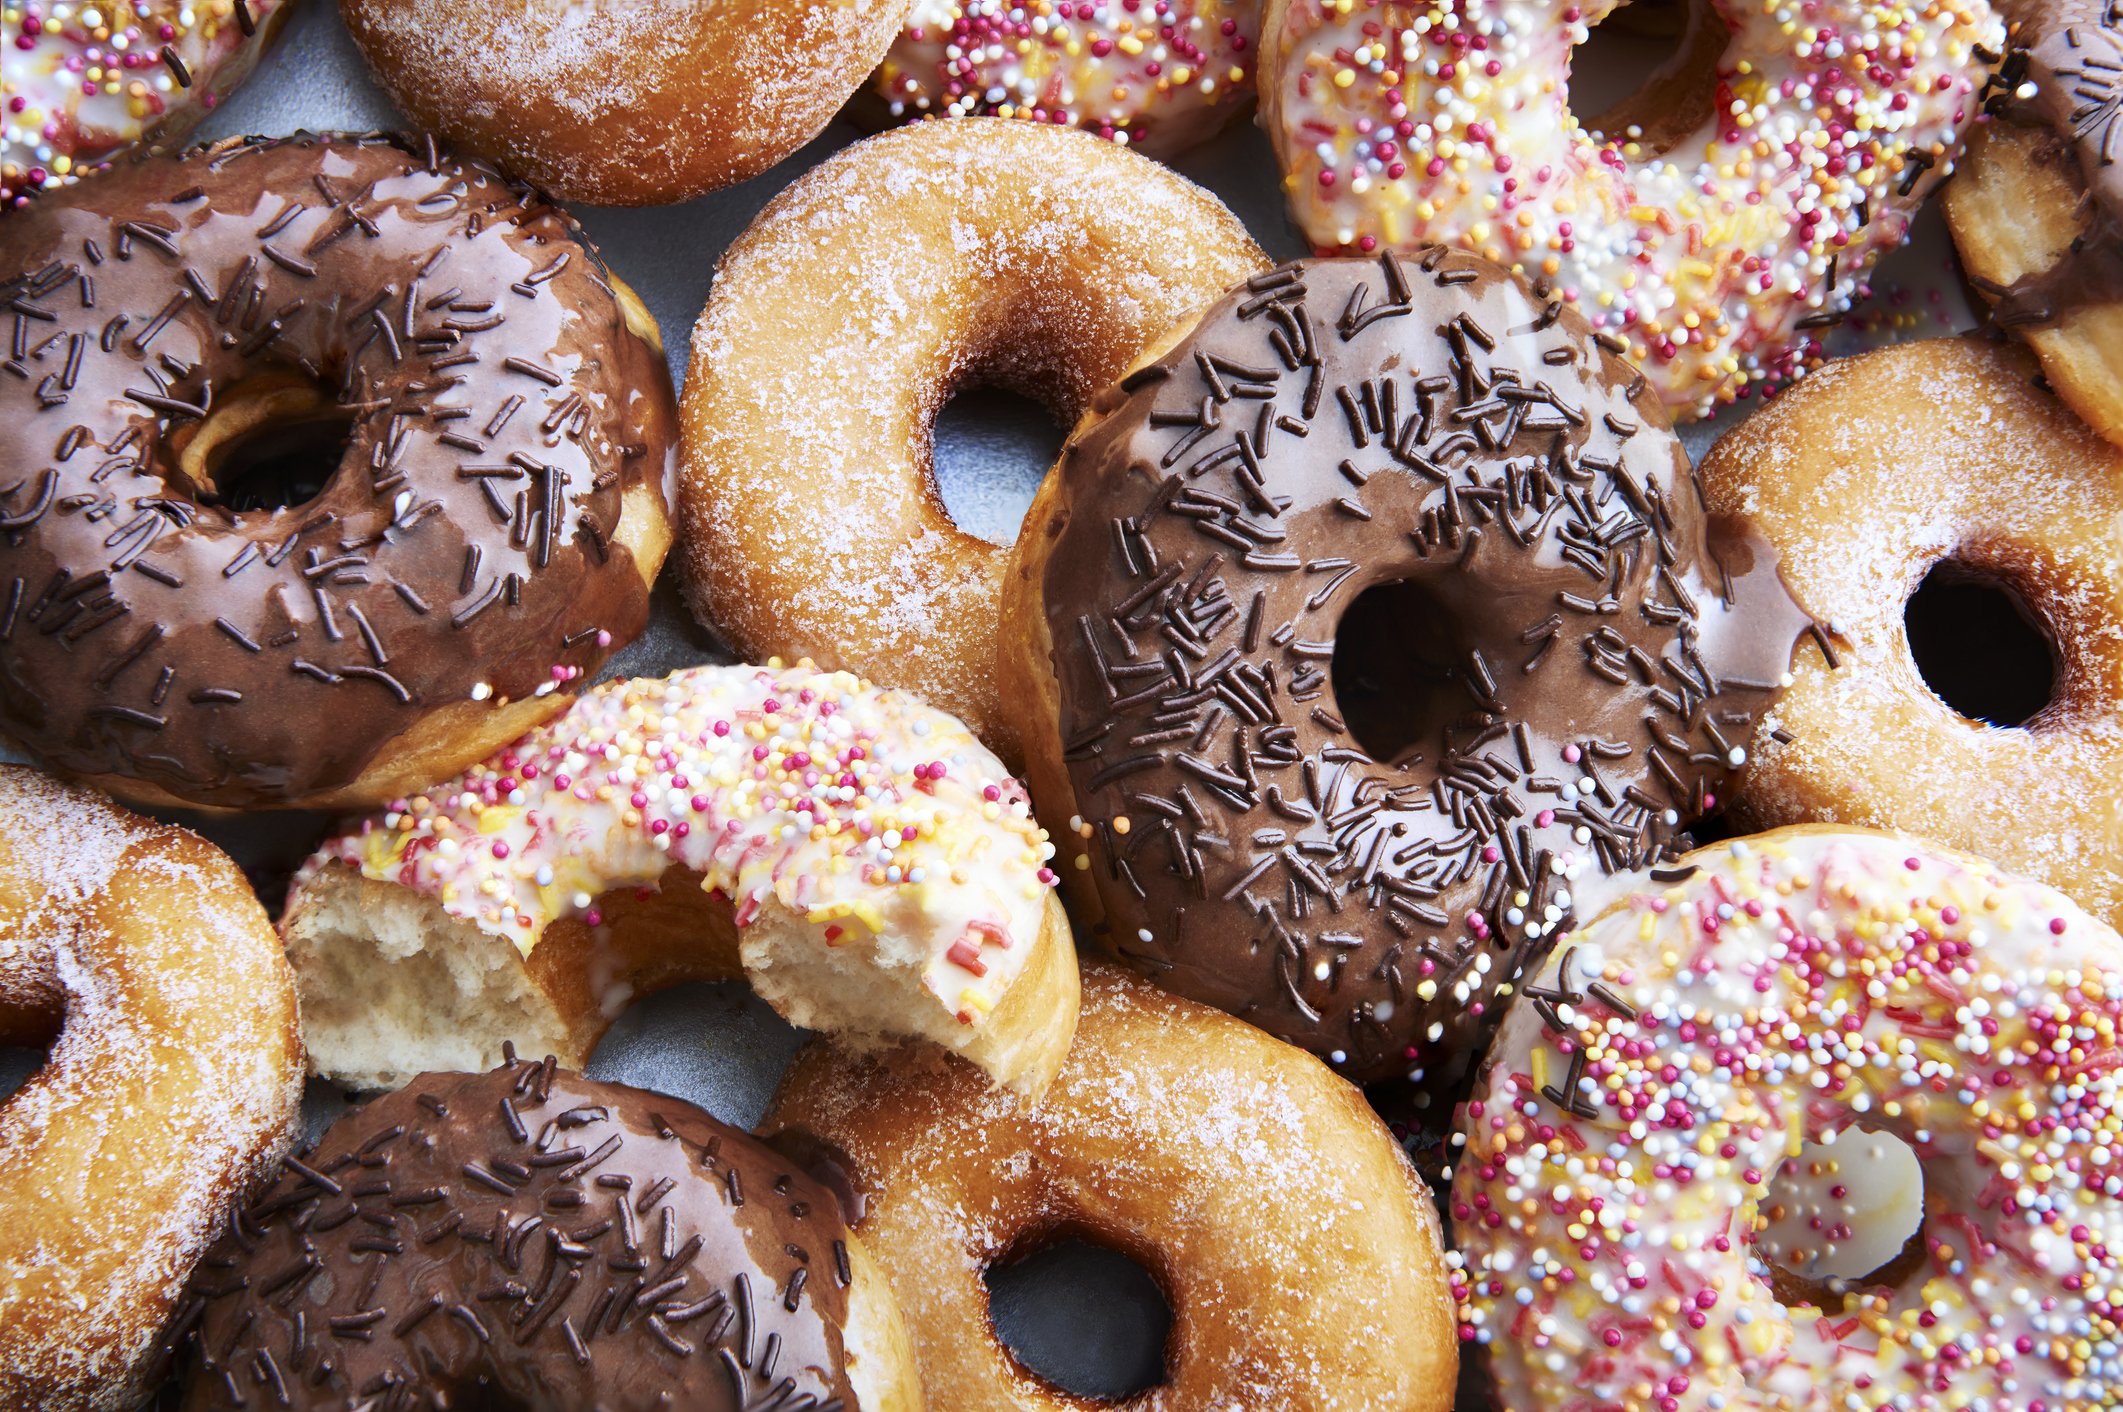 Ring doughnuts covered in icing and sprinkes | Photo: Getty Images